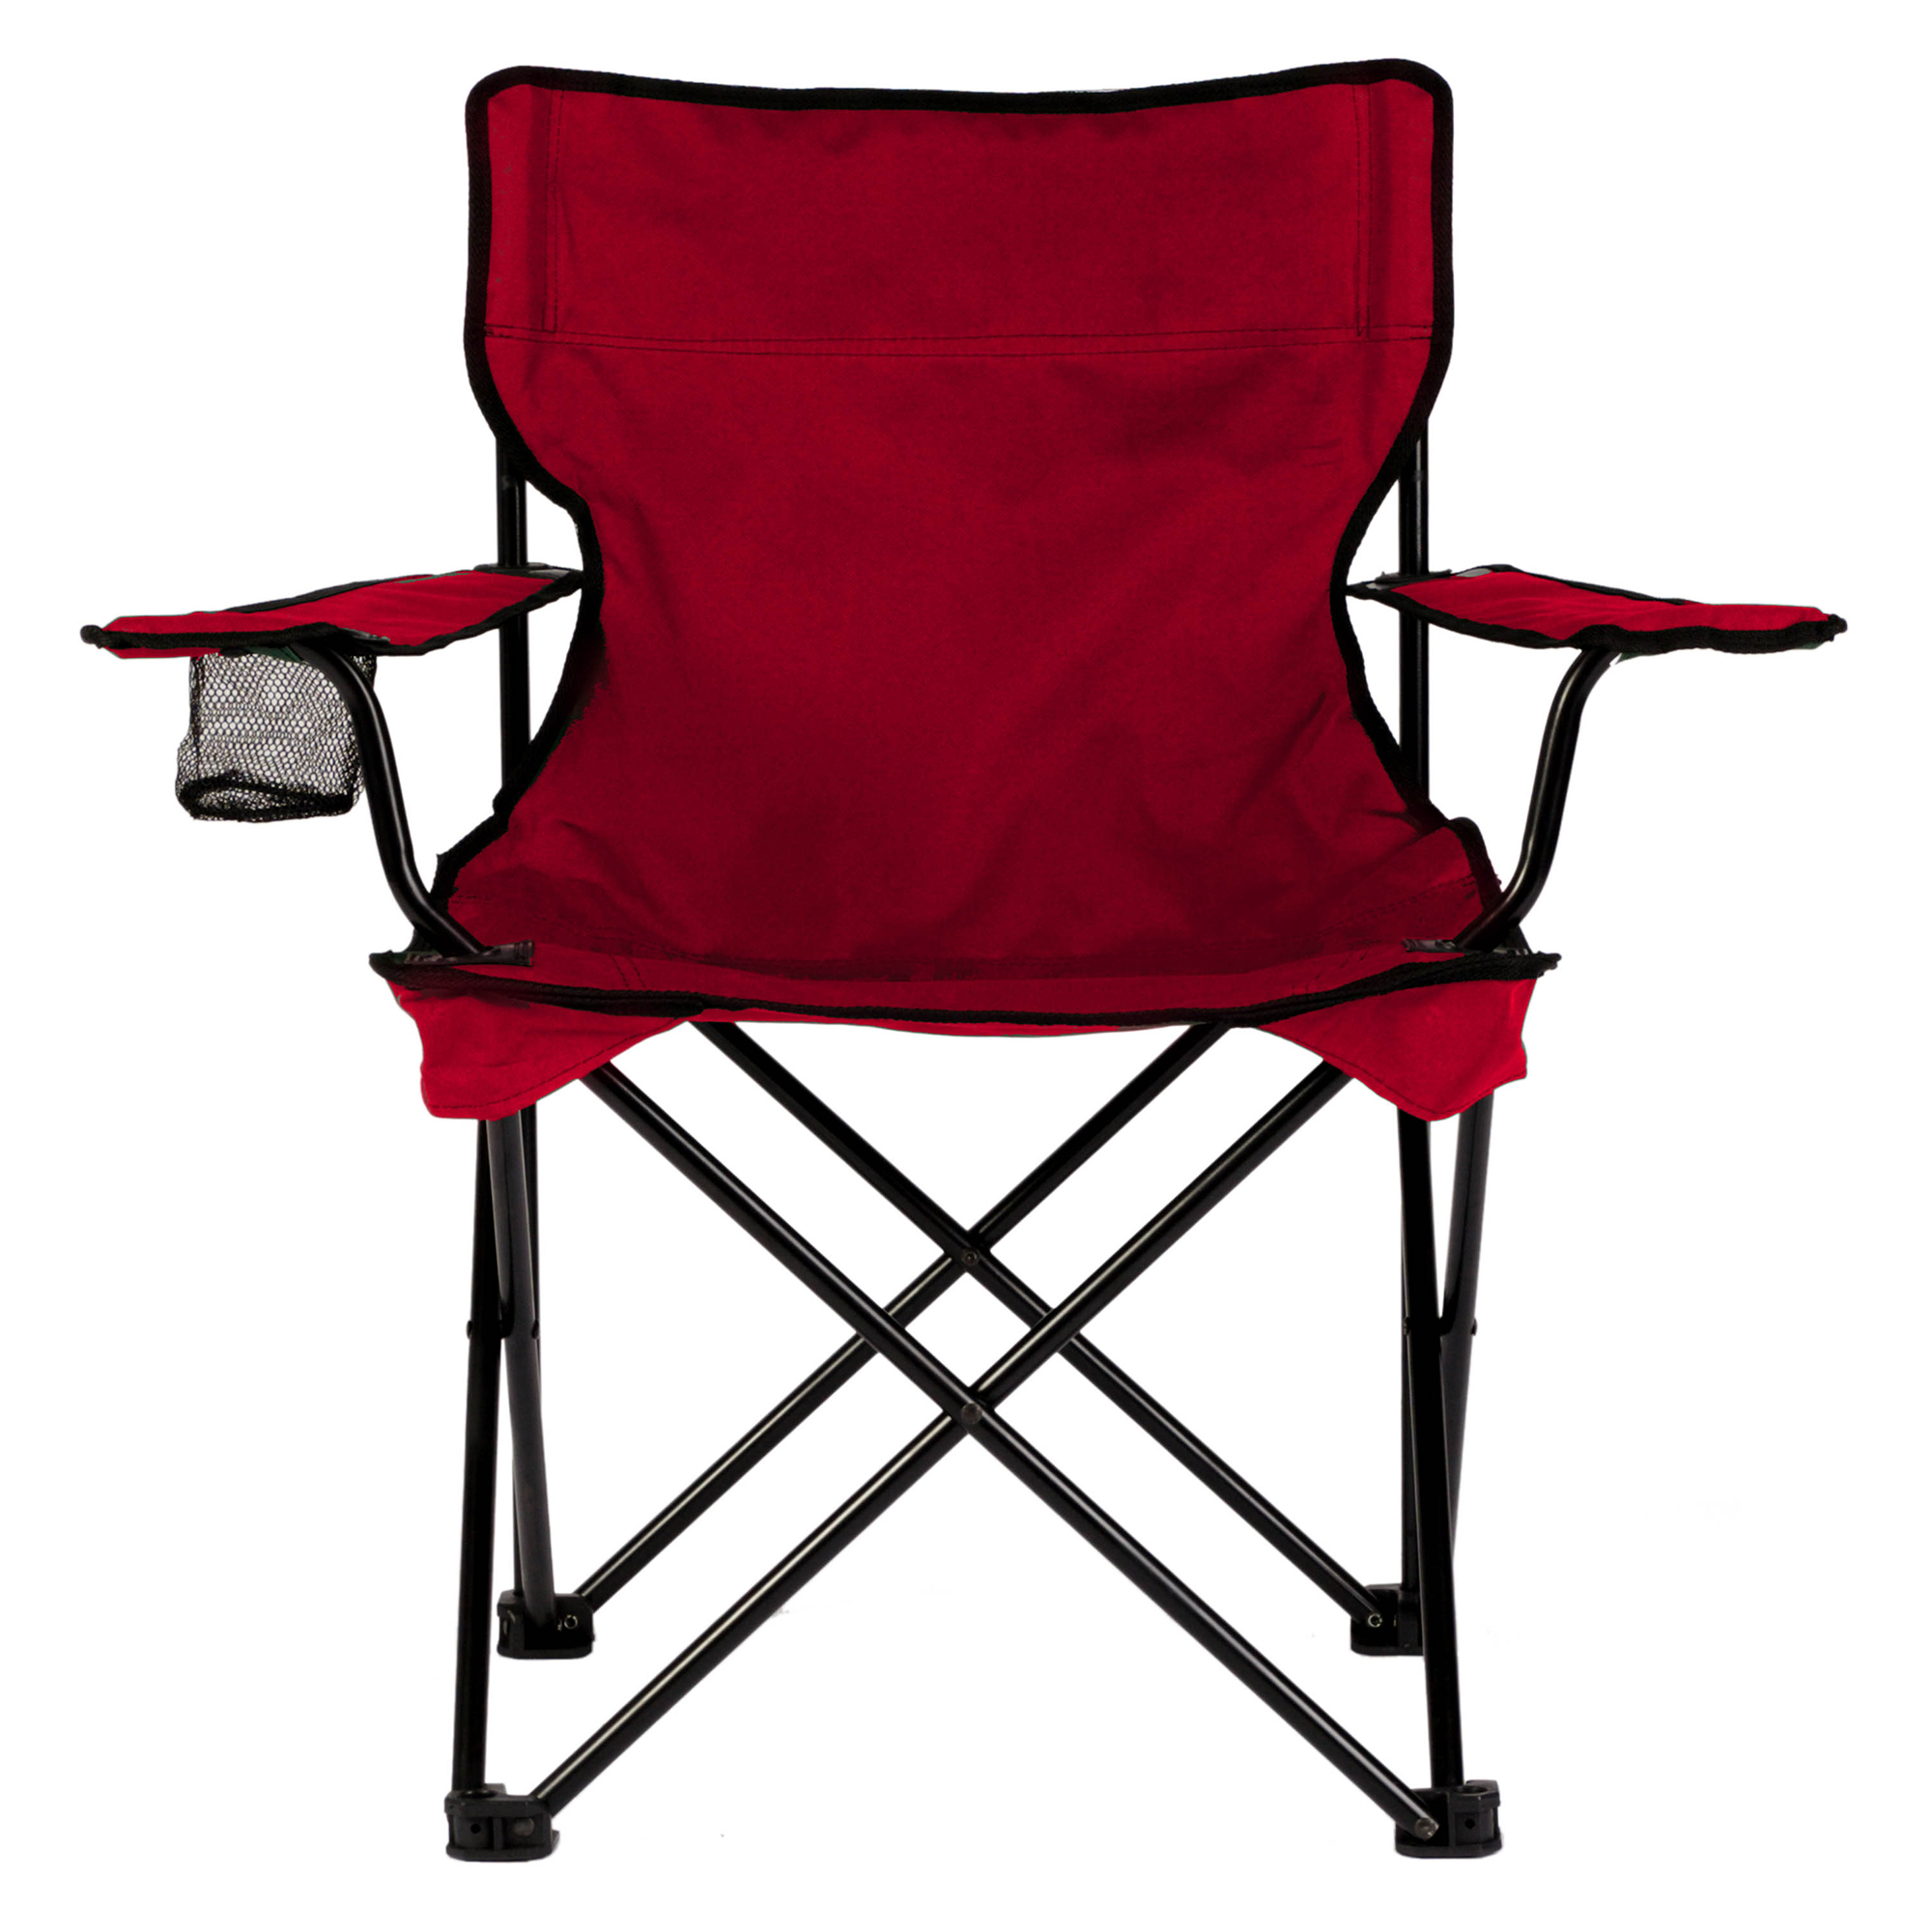 The Ravel Chair Easy Rider C-Series - image 1 of 5